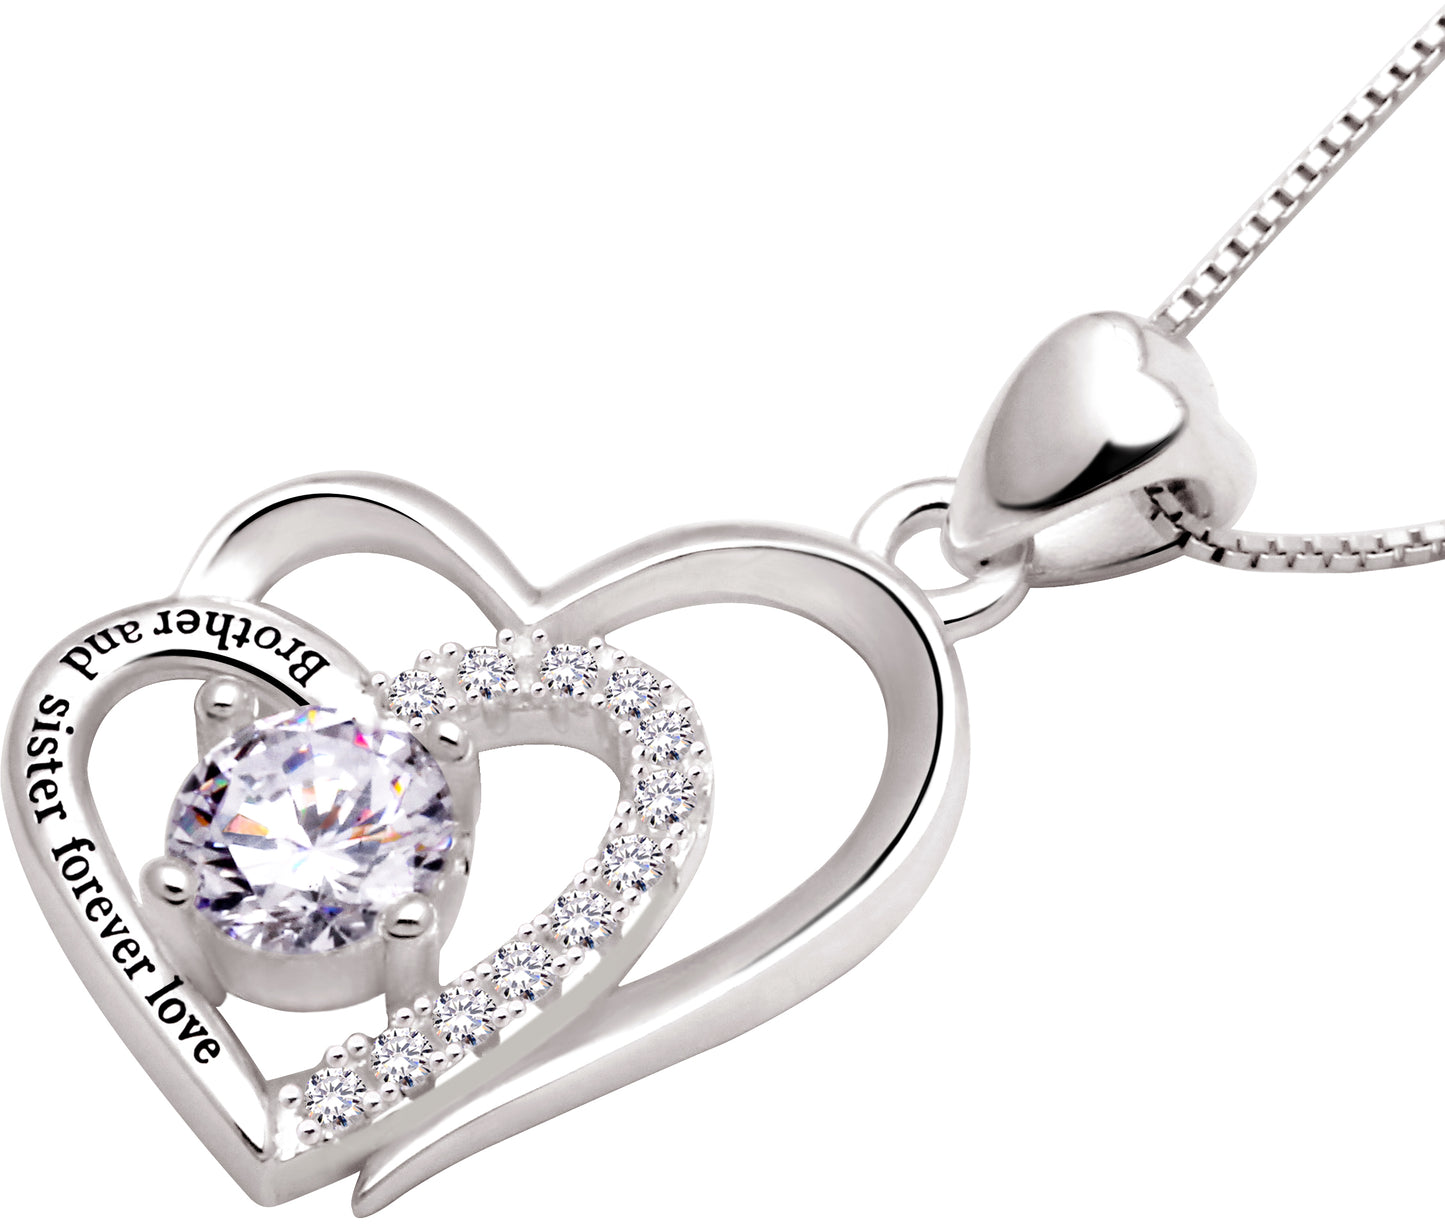 ALOV Jewelry Sterling Silver "Brother and sister forever love" Double Love Heart Cubic Zirconia Pendant Necklace